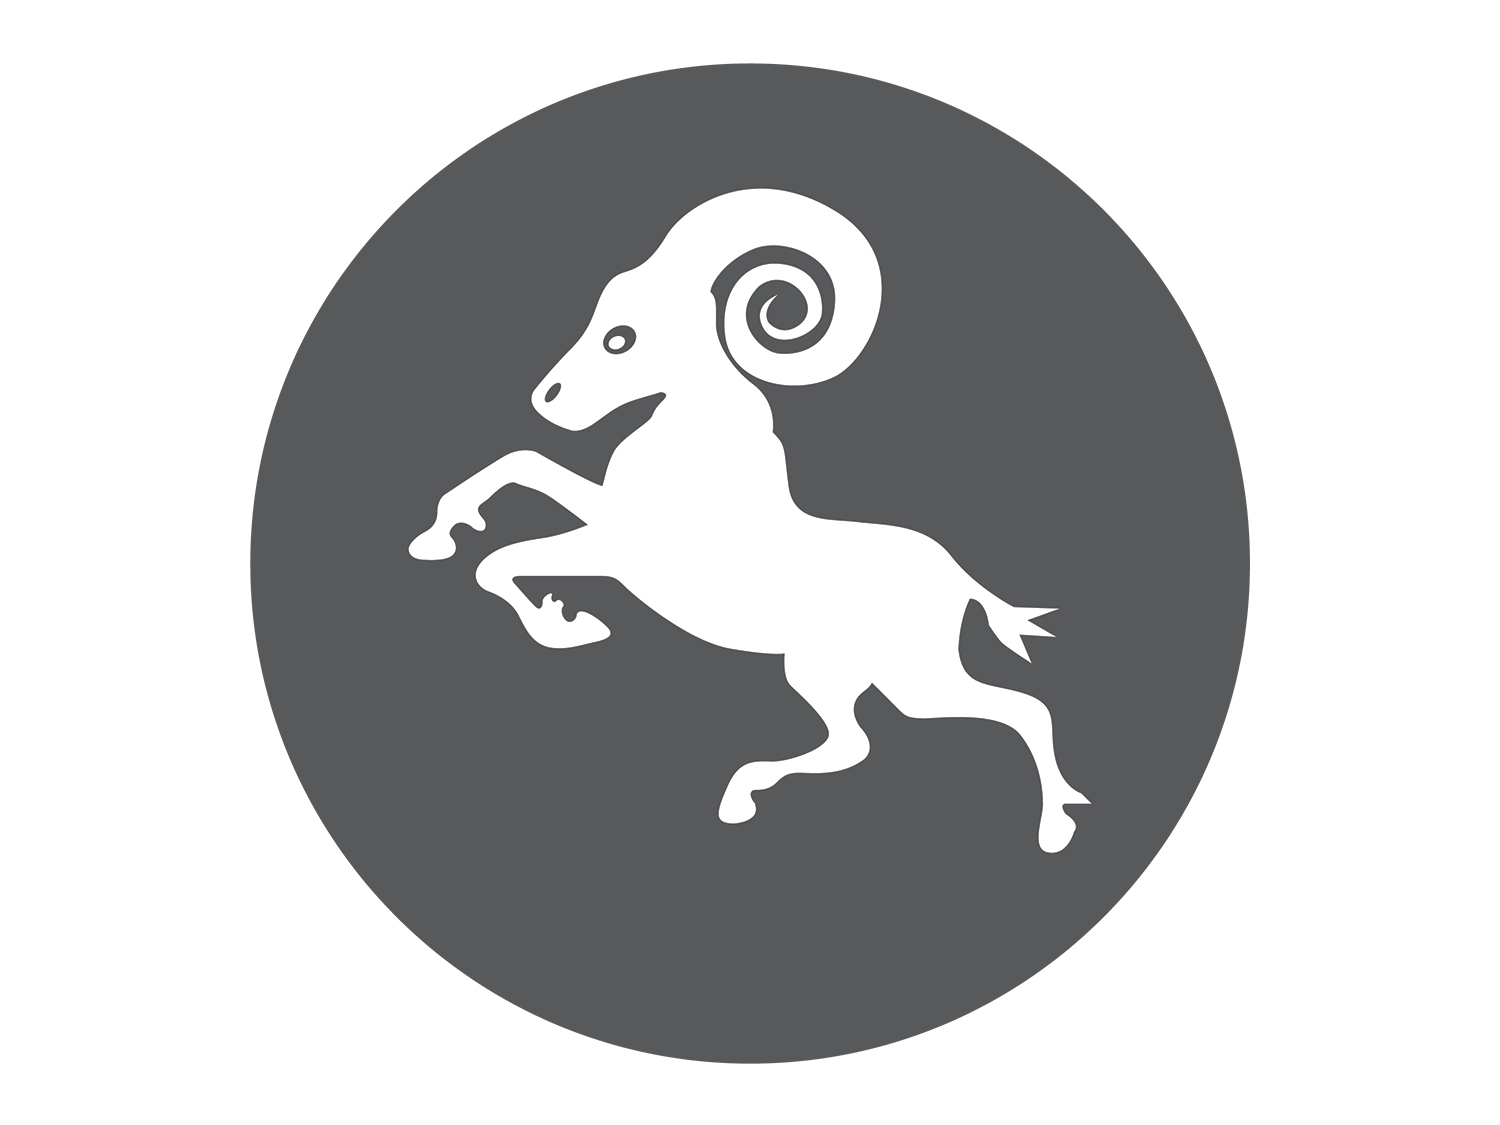 The first Astrology Sign in the Zodiac, Aries the Ram